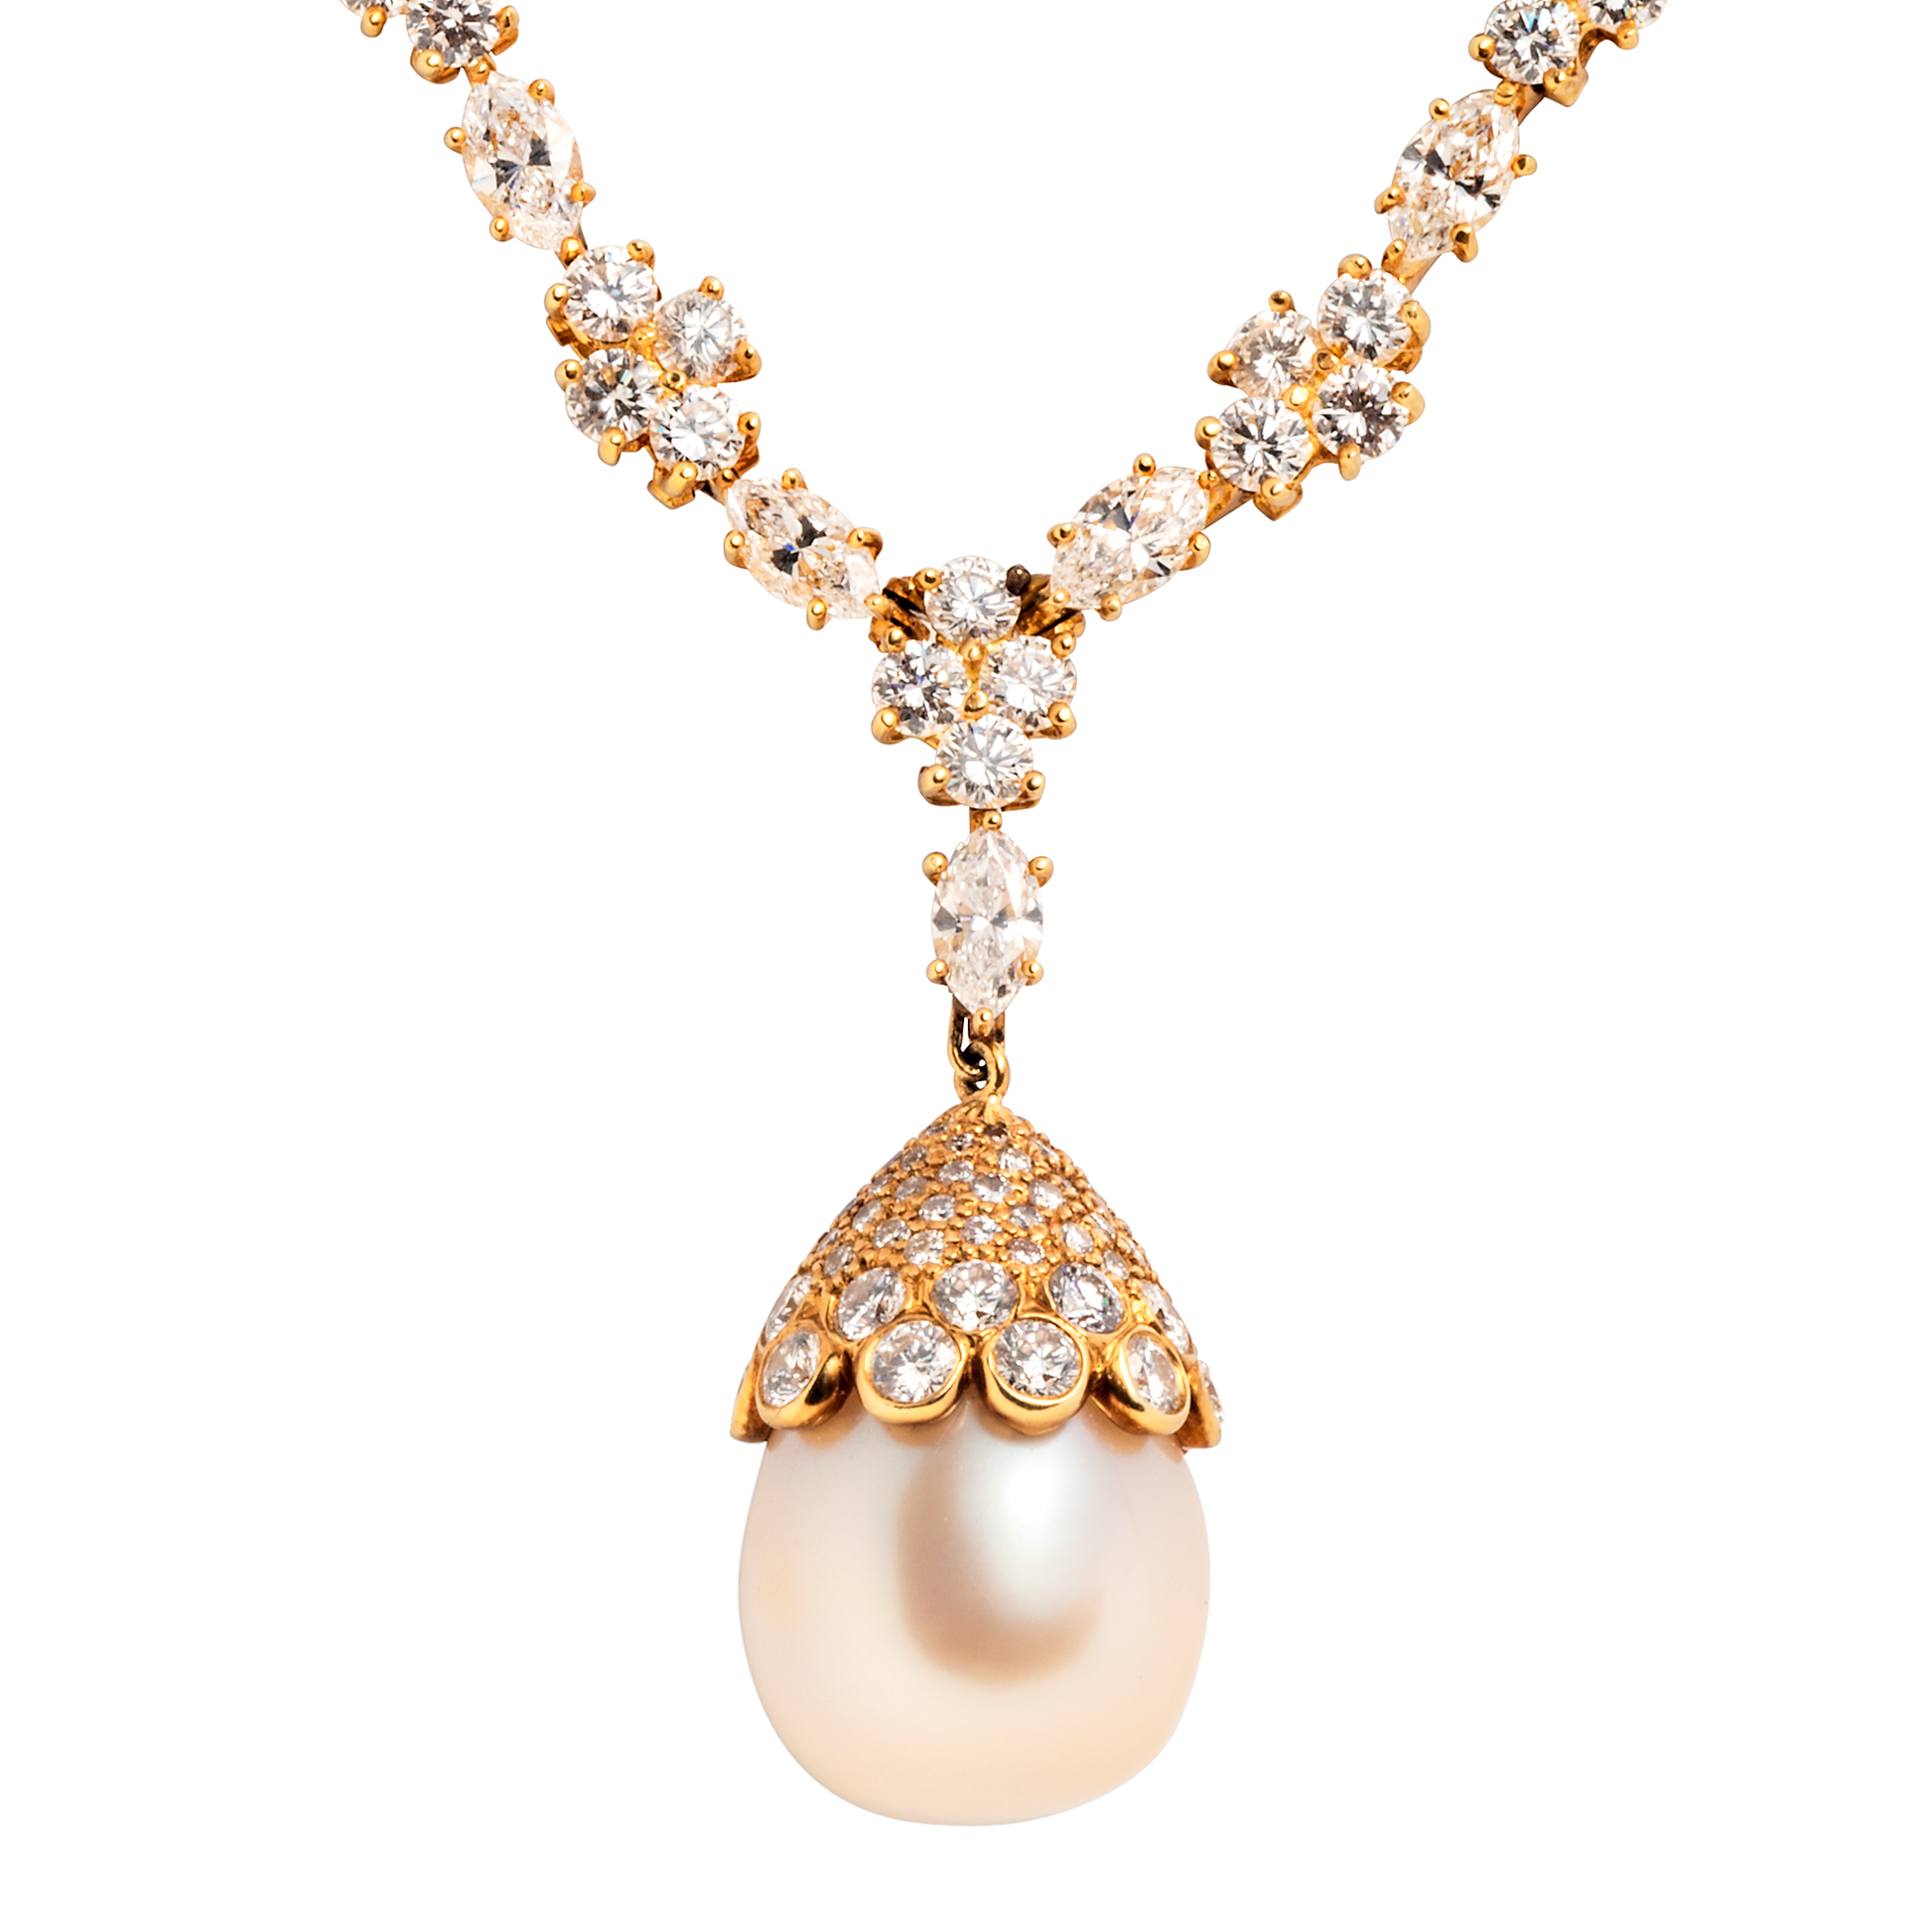 Harry Winston 1990s 18KT Yellow Gold Pearl & Diamond Necklace close-up details